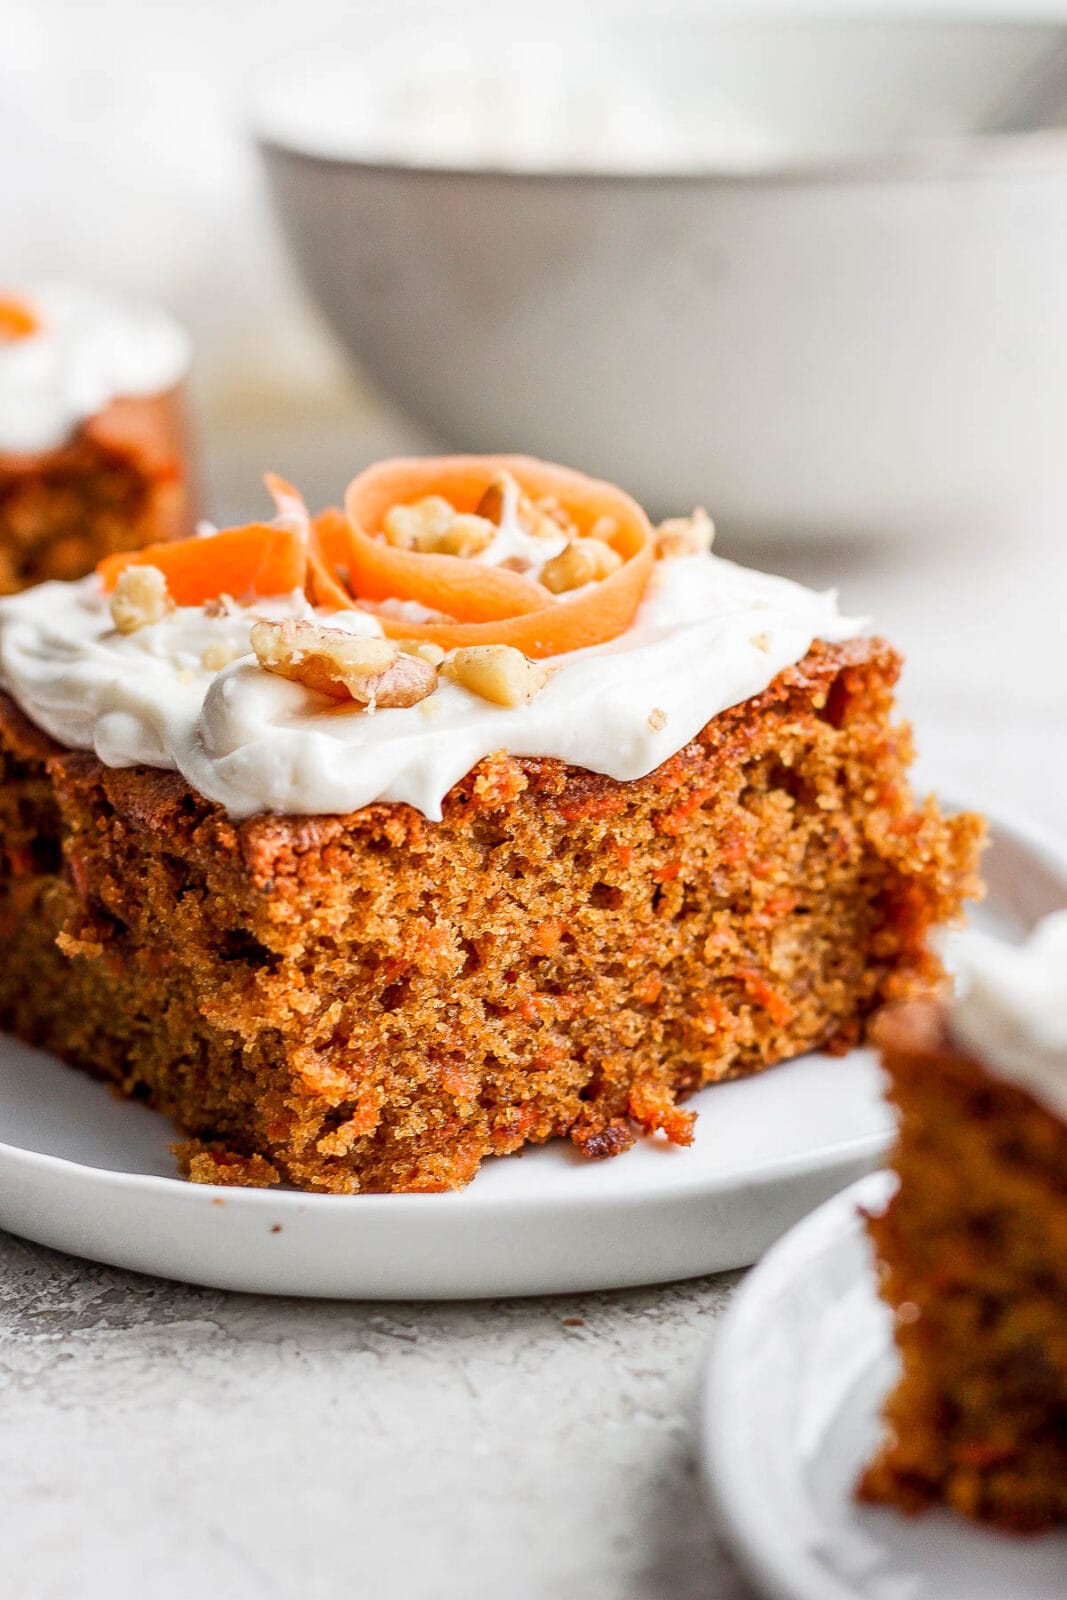 Plate with a slice of carrot cake topped with dairy free cream cheese frosting.